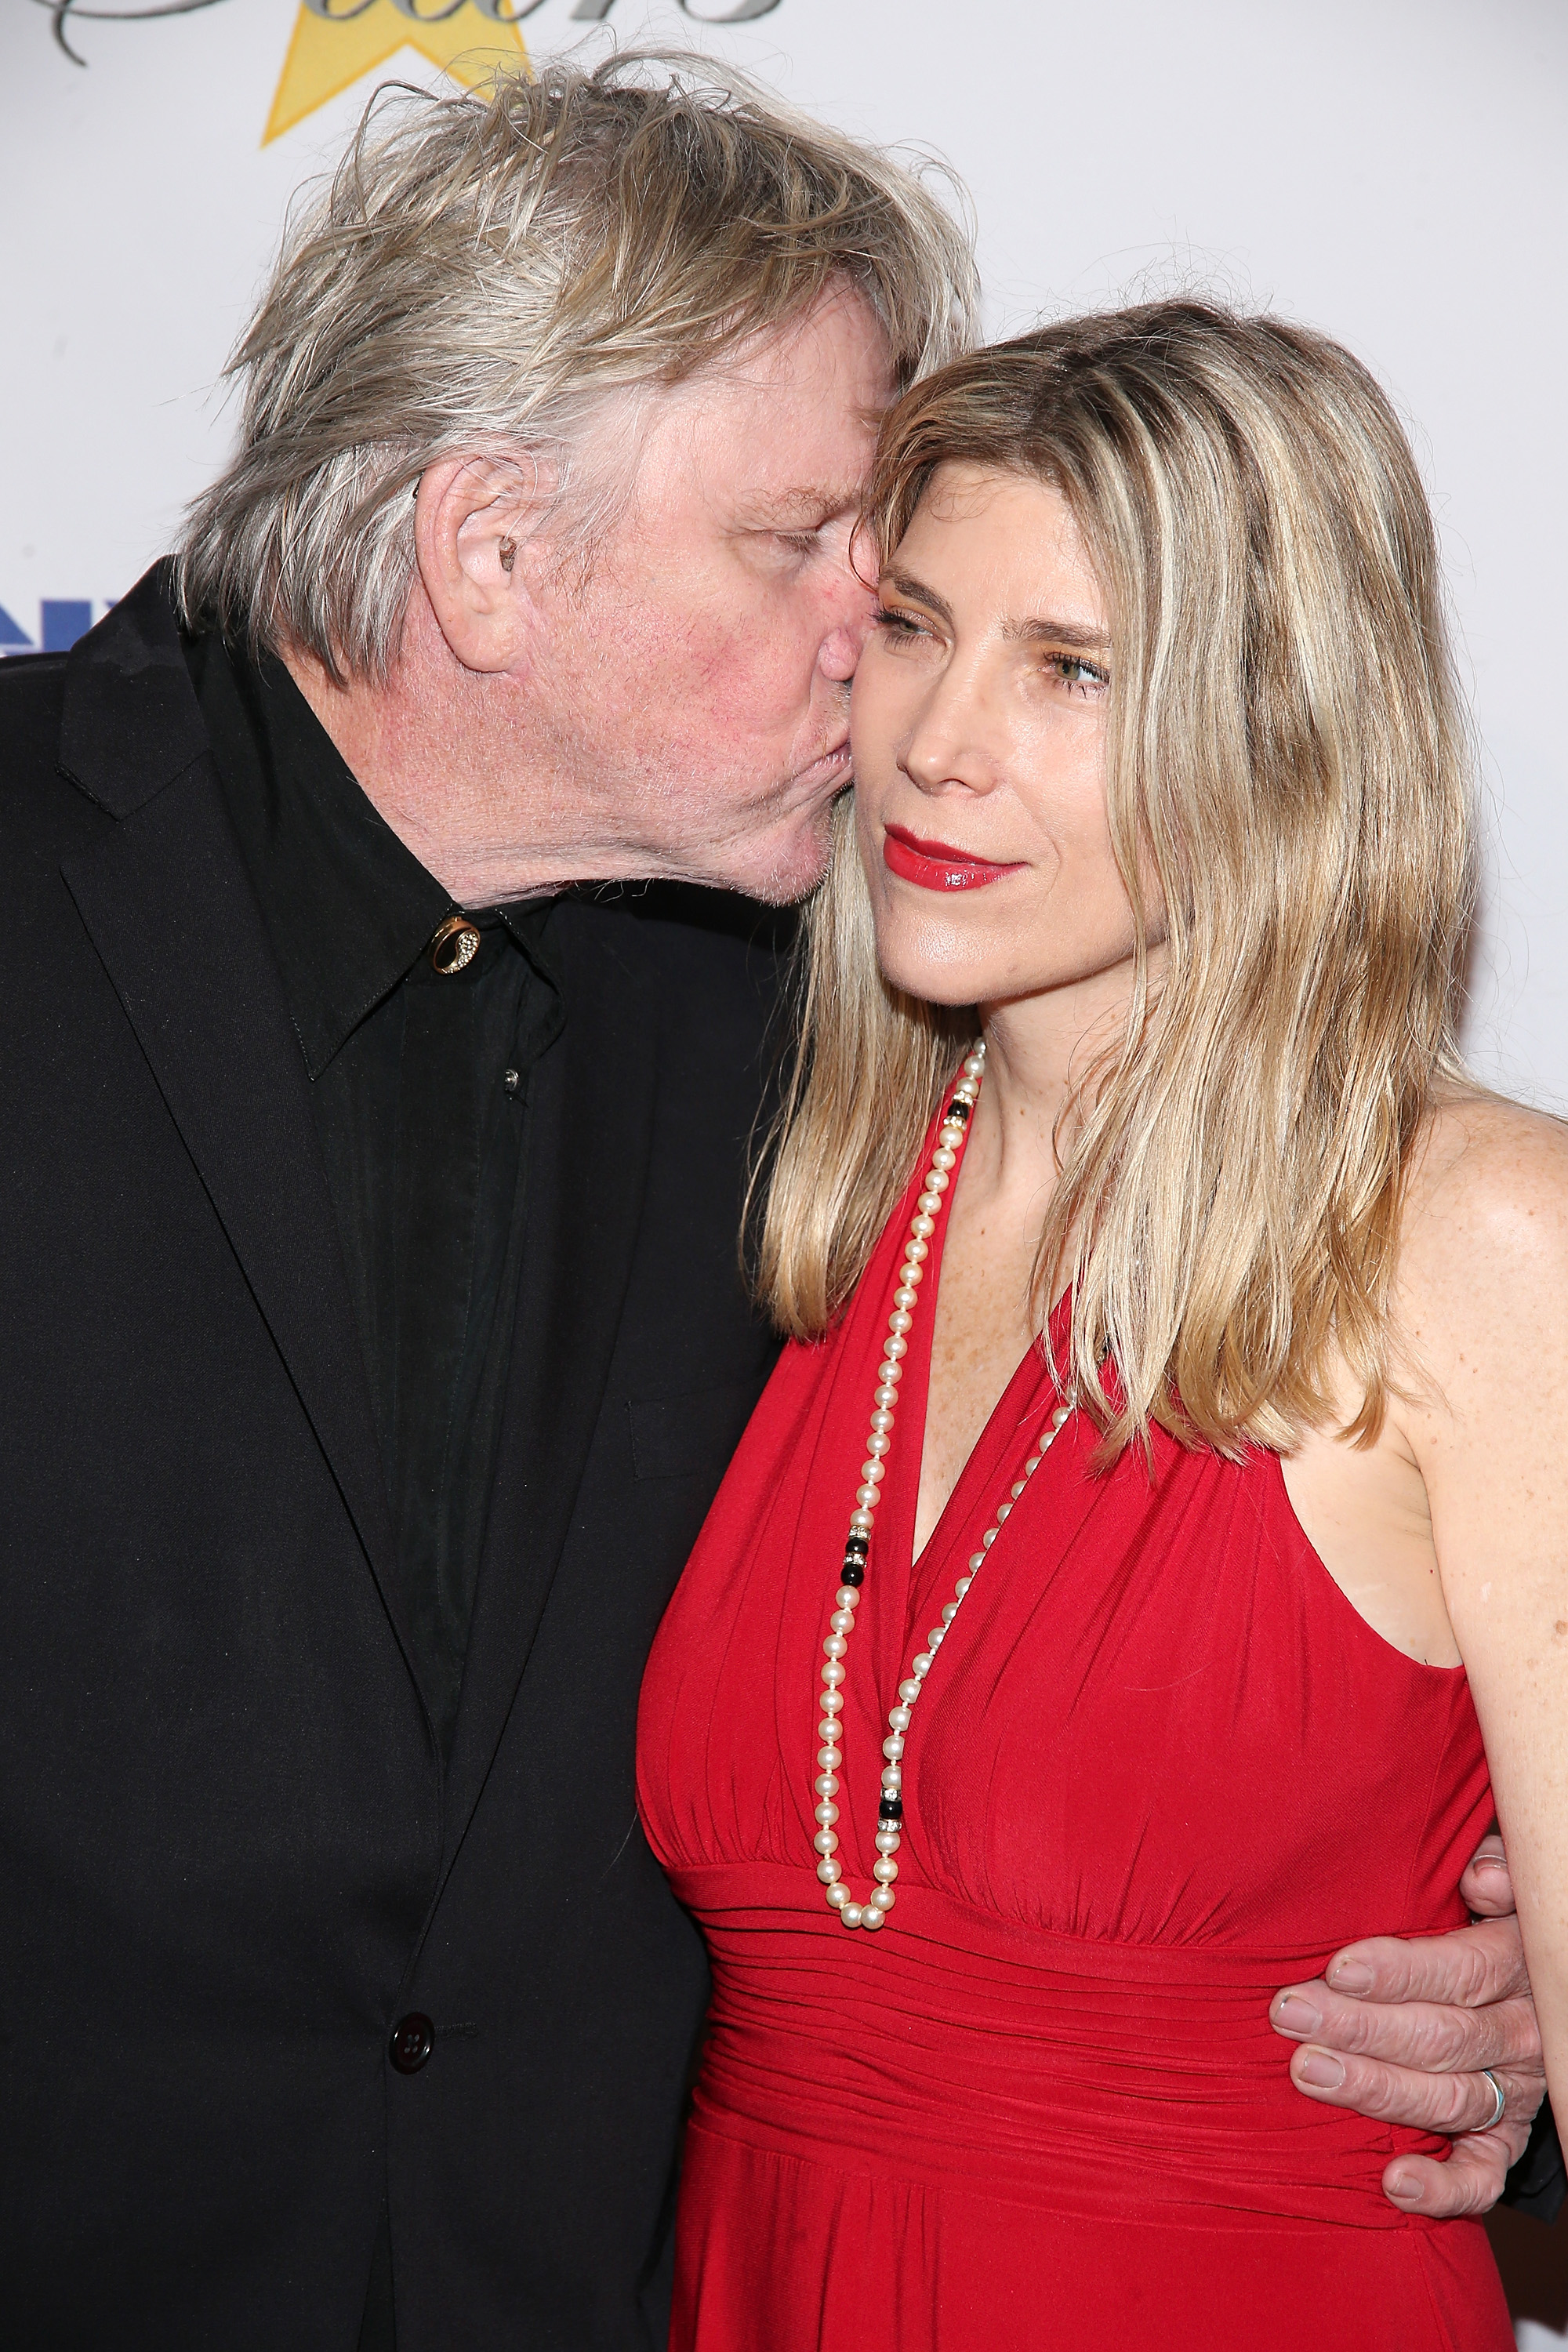 Gary Busey and Steffanie Sampson Busey attend the 27th Annual Night Of 100 Stars Black Tie Dinner Viewing Gala at the Beverly Hilton Hotel on February 26, 2017 in Beverly Hills, California | Source: Getty Images